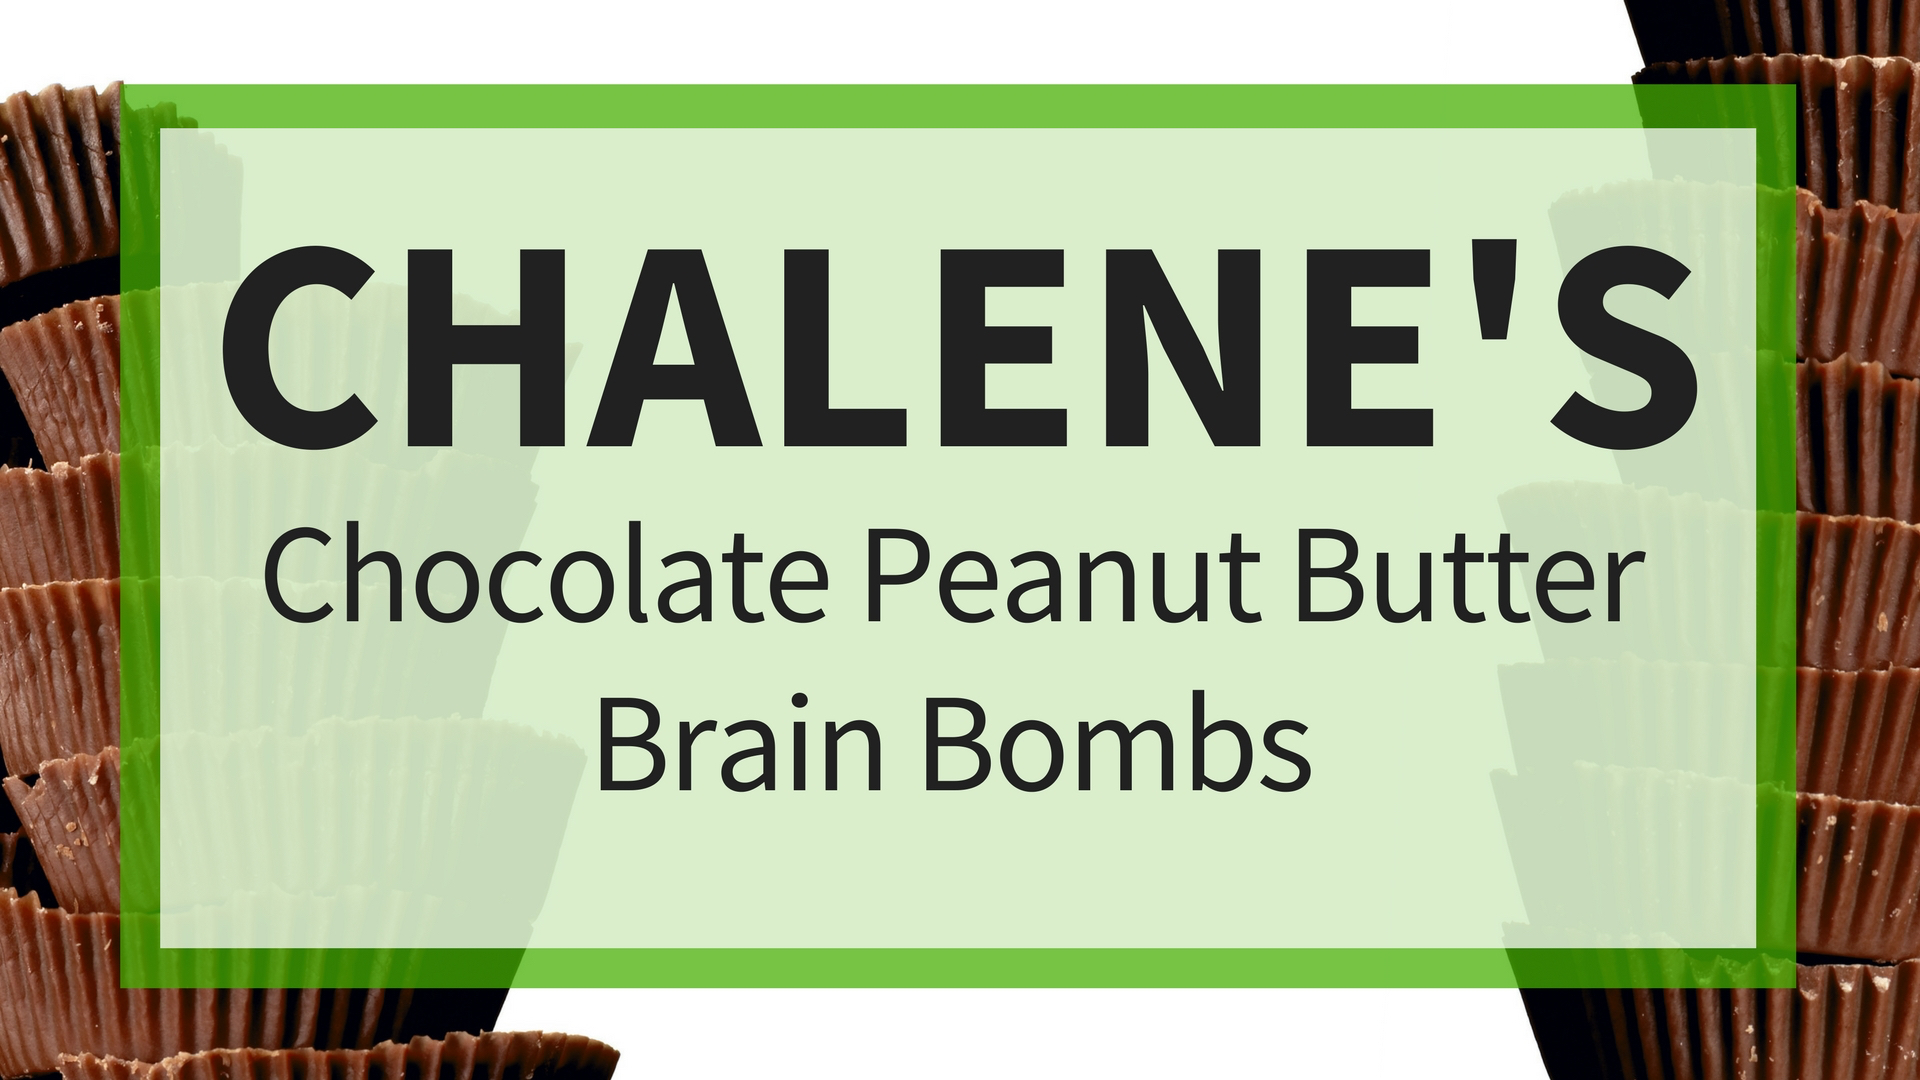 Chalene’s Chocolate Peanut Butter Brain Bombs | Quick and Easy Recipe for Protein Balls